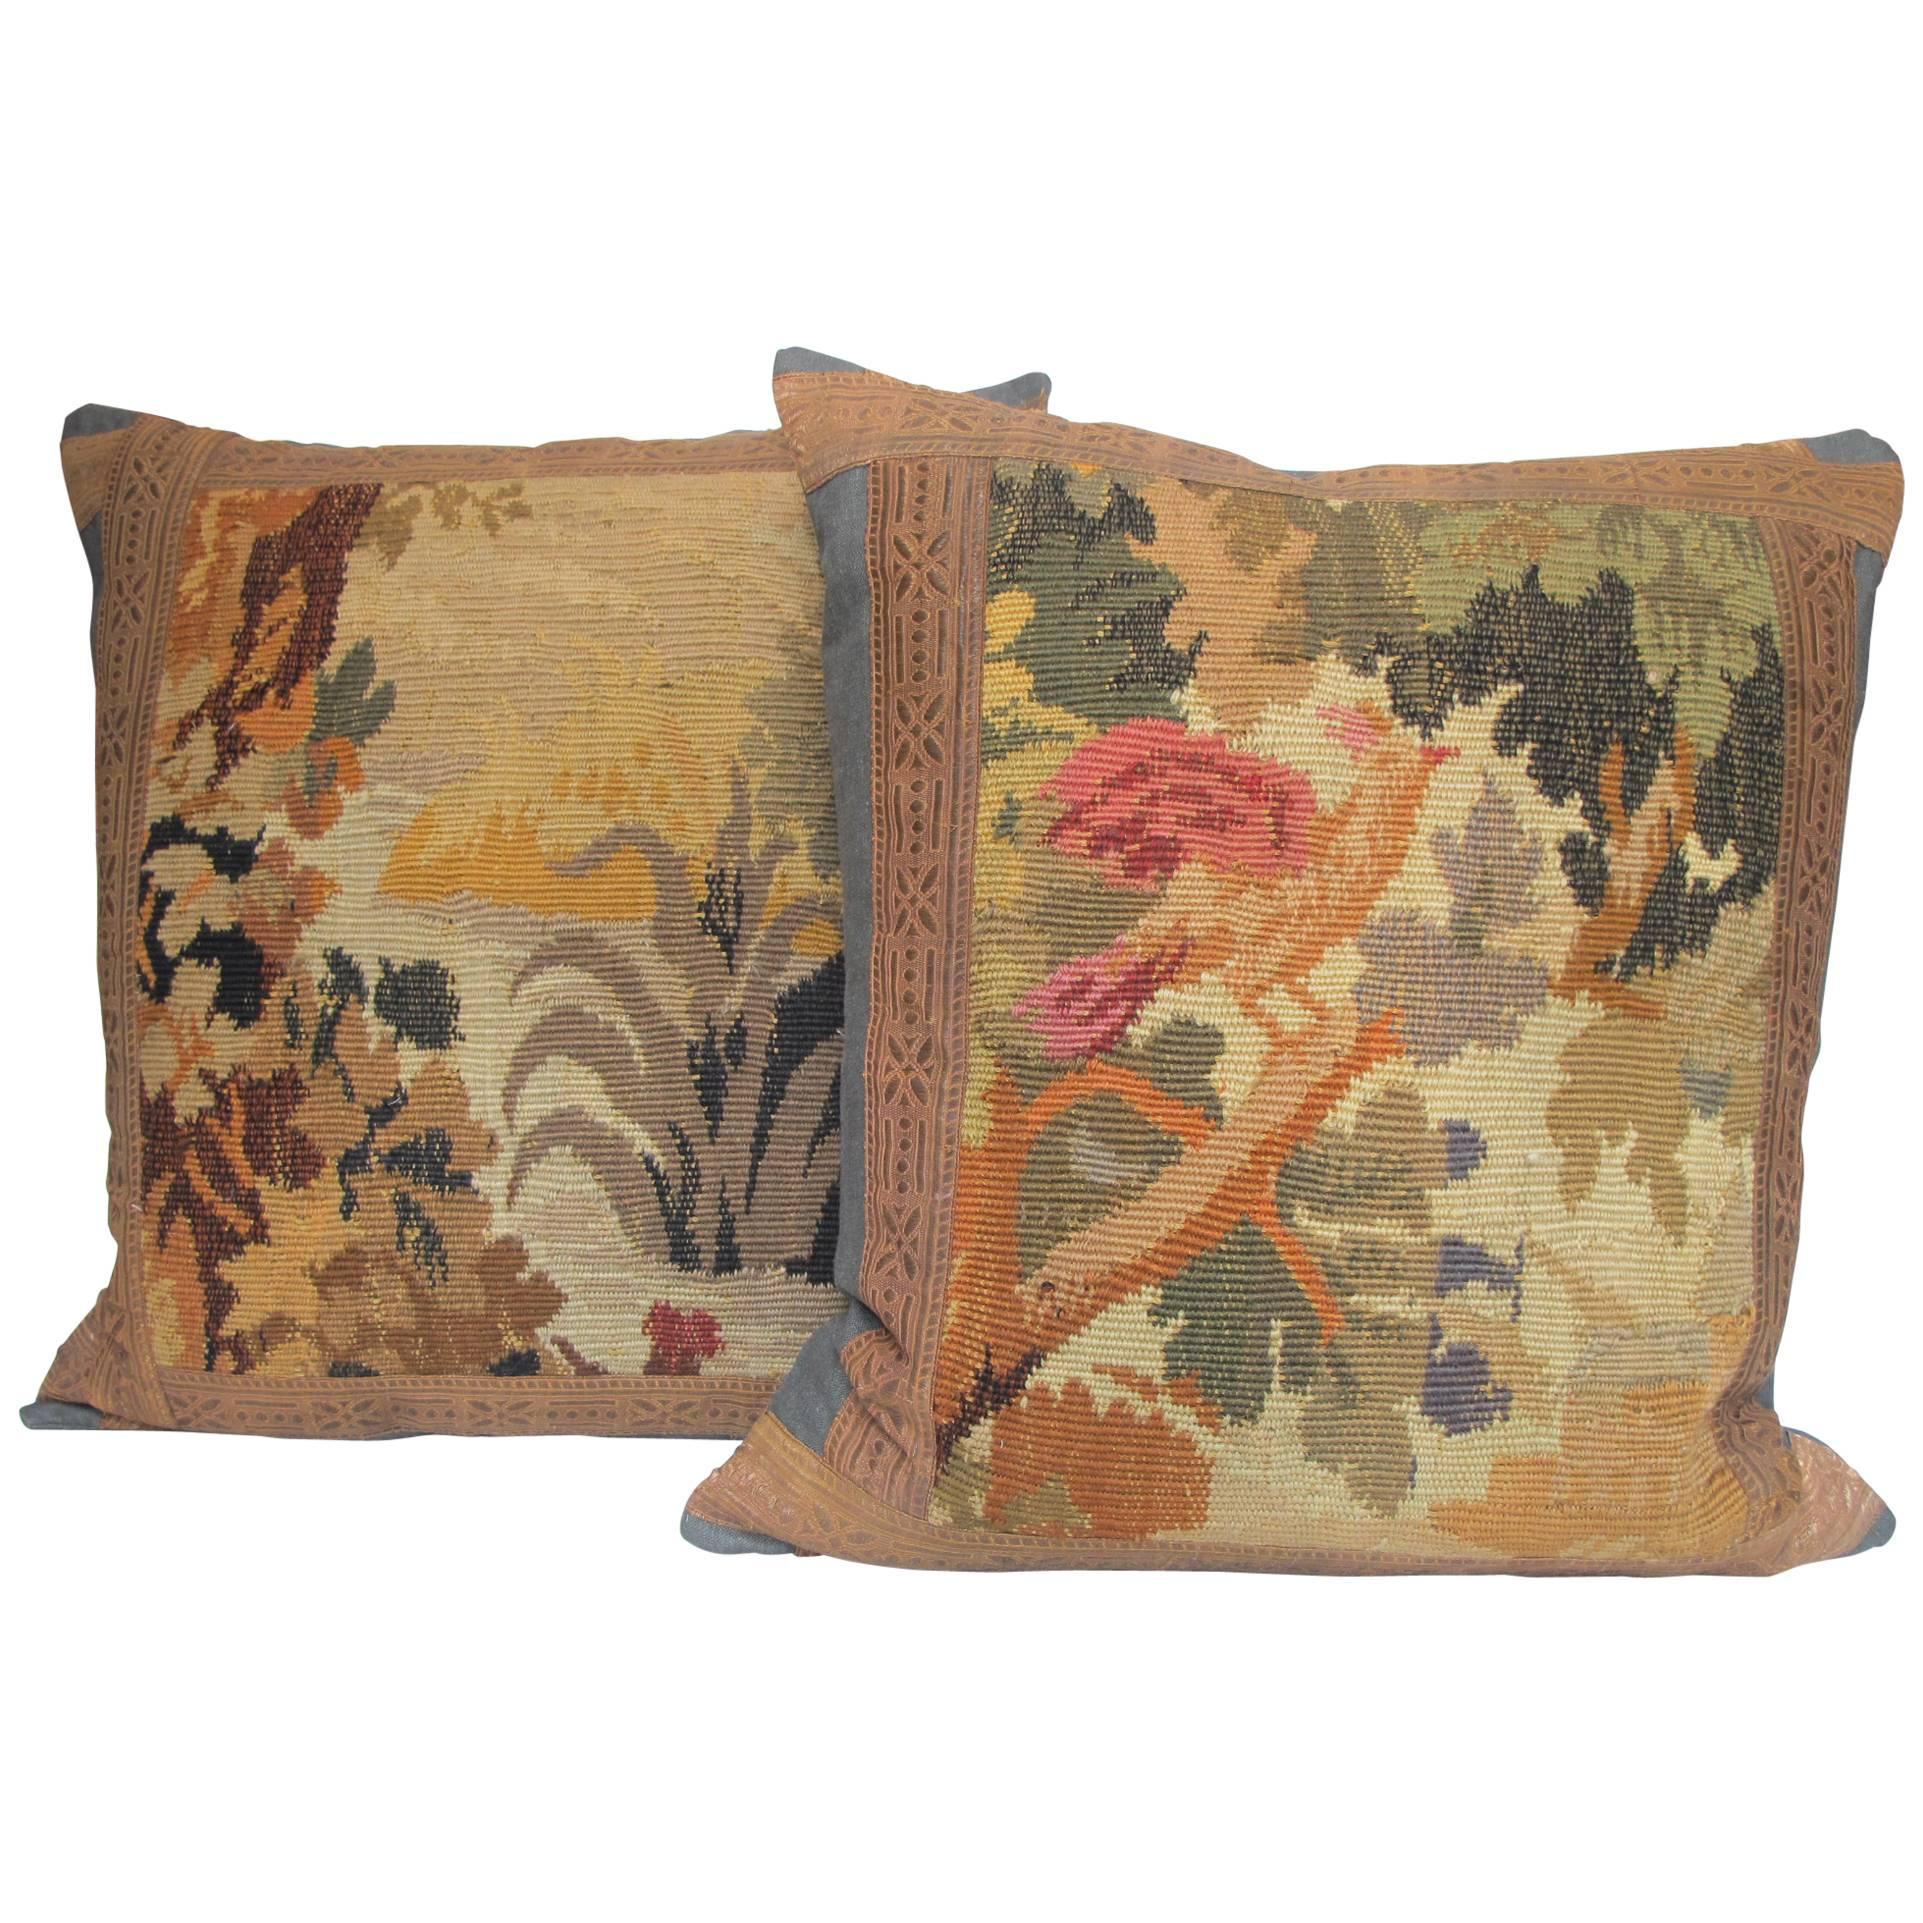 19th Century Aubosson Tapestry Pillows by Mary Jane McCarty